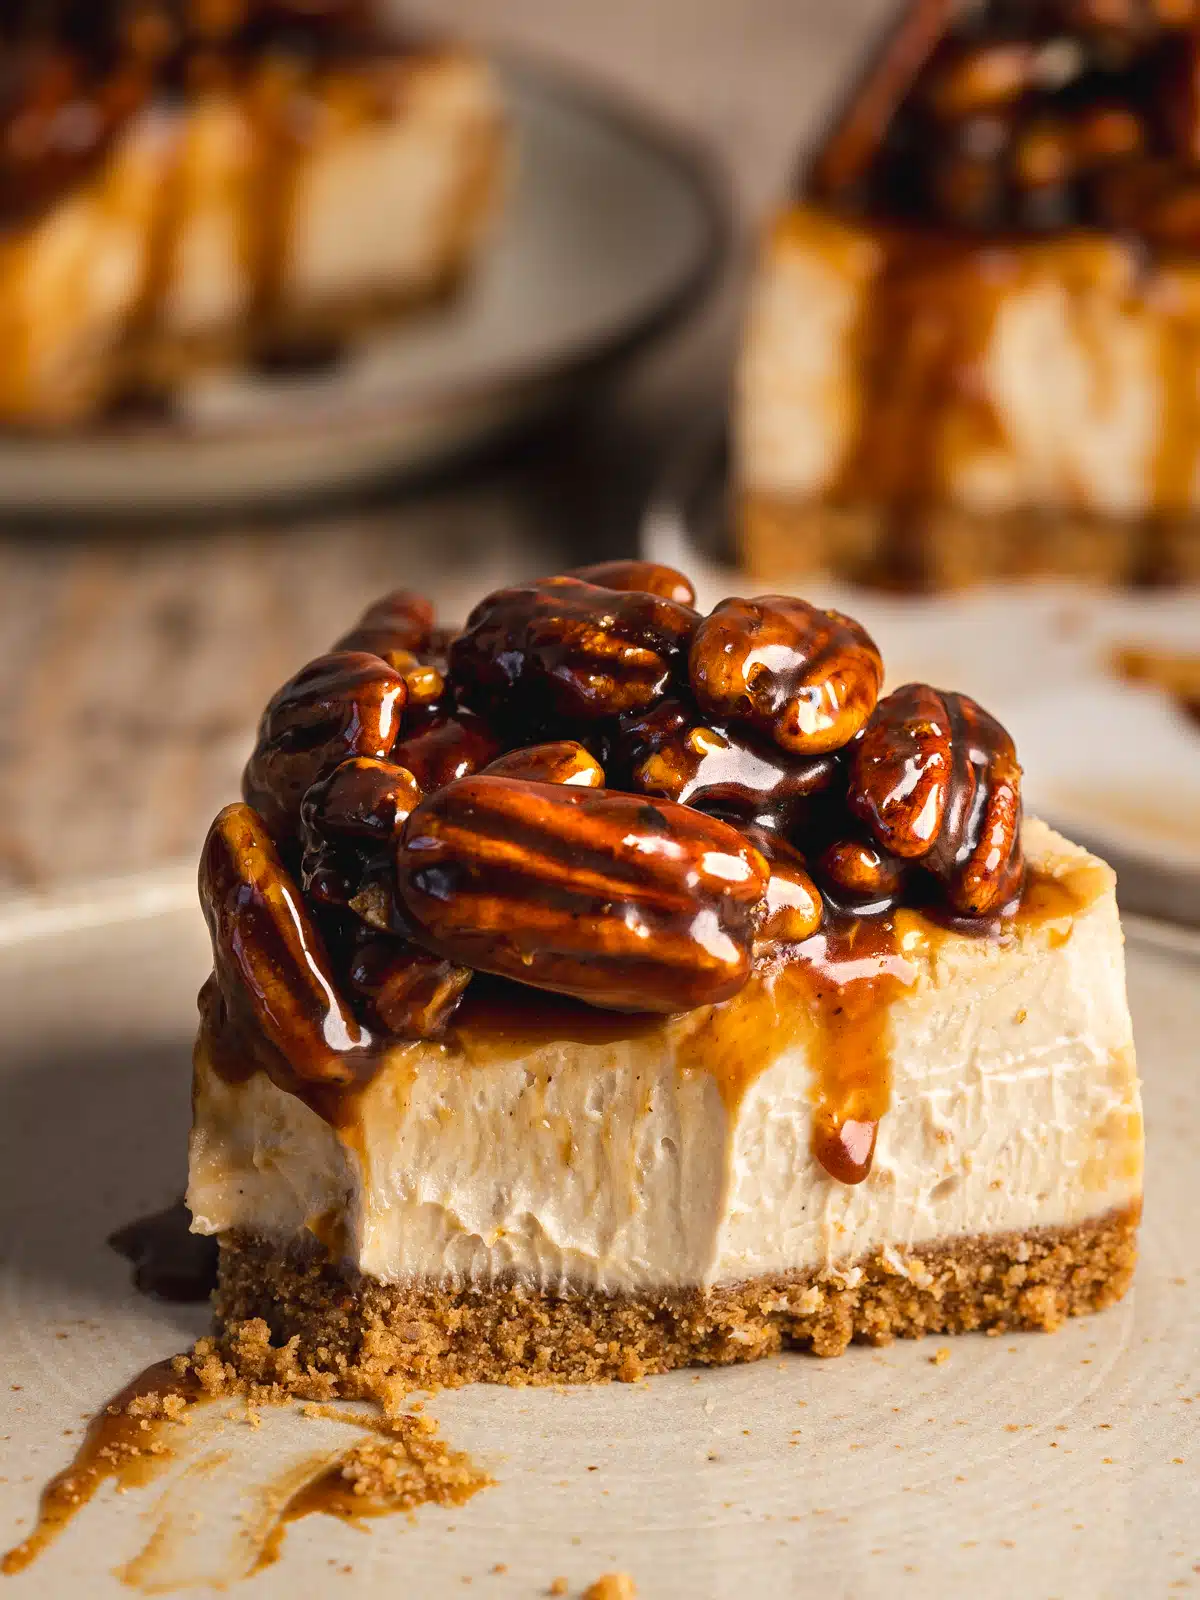 vegan pecan cheesecake on a ceramic plate with caramel pecan topping oozing down the sides. There is a bite taken from the cake, showing the creamy consistency.